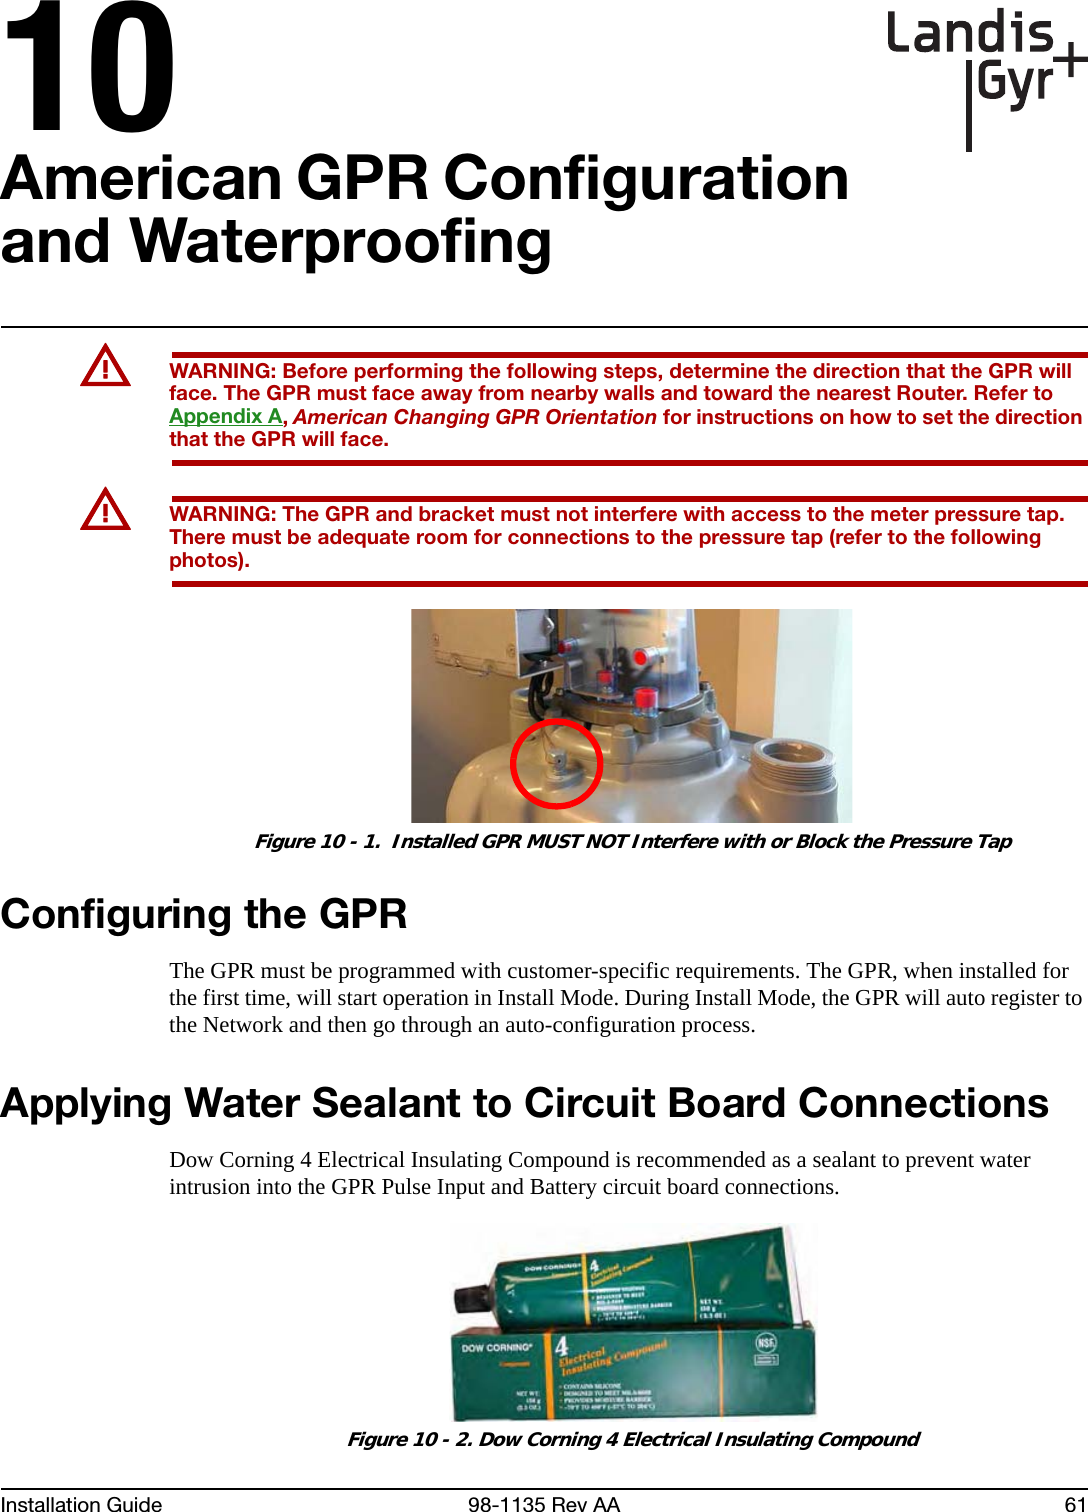 10Installation Guide 98-1135 Rev AA 61American GPR Configuration and WaterproofingUWARNING: Before performing the following steps, determine the direction that the GPR will face. The GPR must face away from nearby walls and toward the nearest Router. Refer to Appendix A, American Changing GPR Orientation for instructions on how to set the direction that the GPR will face.UWARNING: The GPR and bracket must not interfere with access to the meter pressure tap. There must be adequate room for connections to the pressure tap (refer to the following photos). Figure 10 - 1.  Installed GPR MUST NOT Interfere with or Block the Pressure TapConfiguring the GPRThe GPR must be programmed with customer-specific requirements. The GPR, when installed for the first time, will start operation in Install Mode. During Install Mode, the GPR will auto register to the Network and then go through an auto-configuration process.Applying Water Sealant to Circuit Board ConnectionsDow Corning 4 Electrical Insulating Compound is recommended as a sealant to prevent water intrusion into the GPR Pulse Input and Battery circuit board connections. Figure 10 - 2. Dow Corning 4 Electrical Insulating Compound